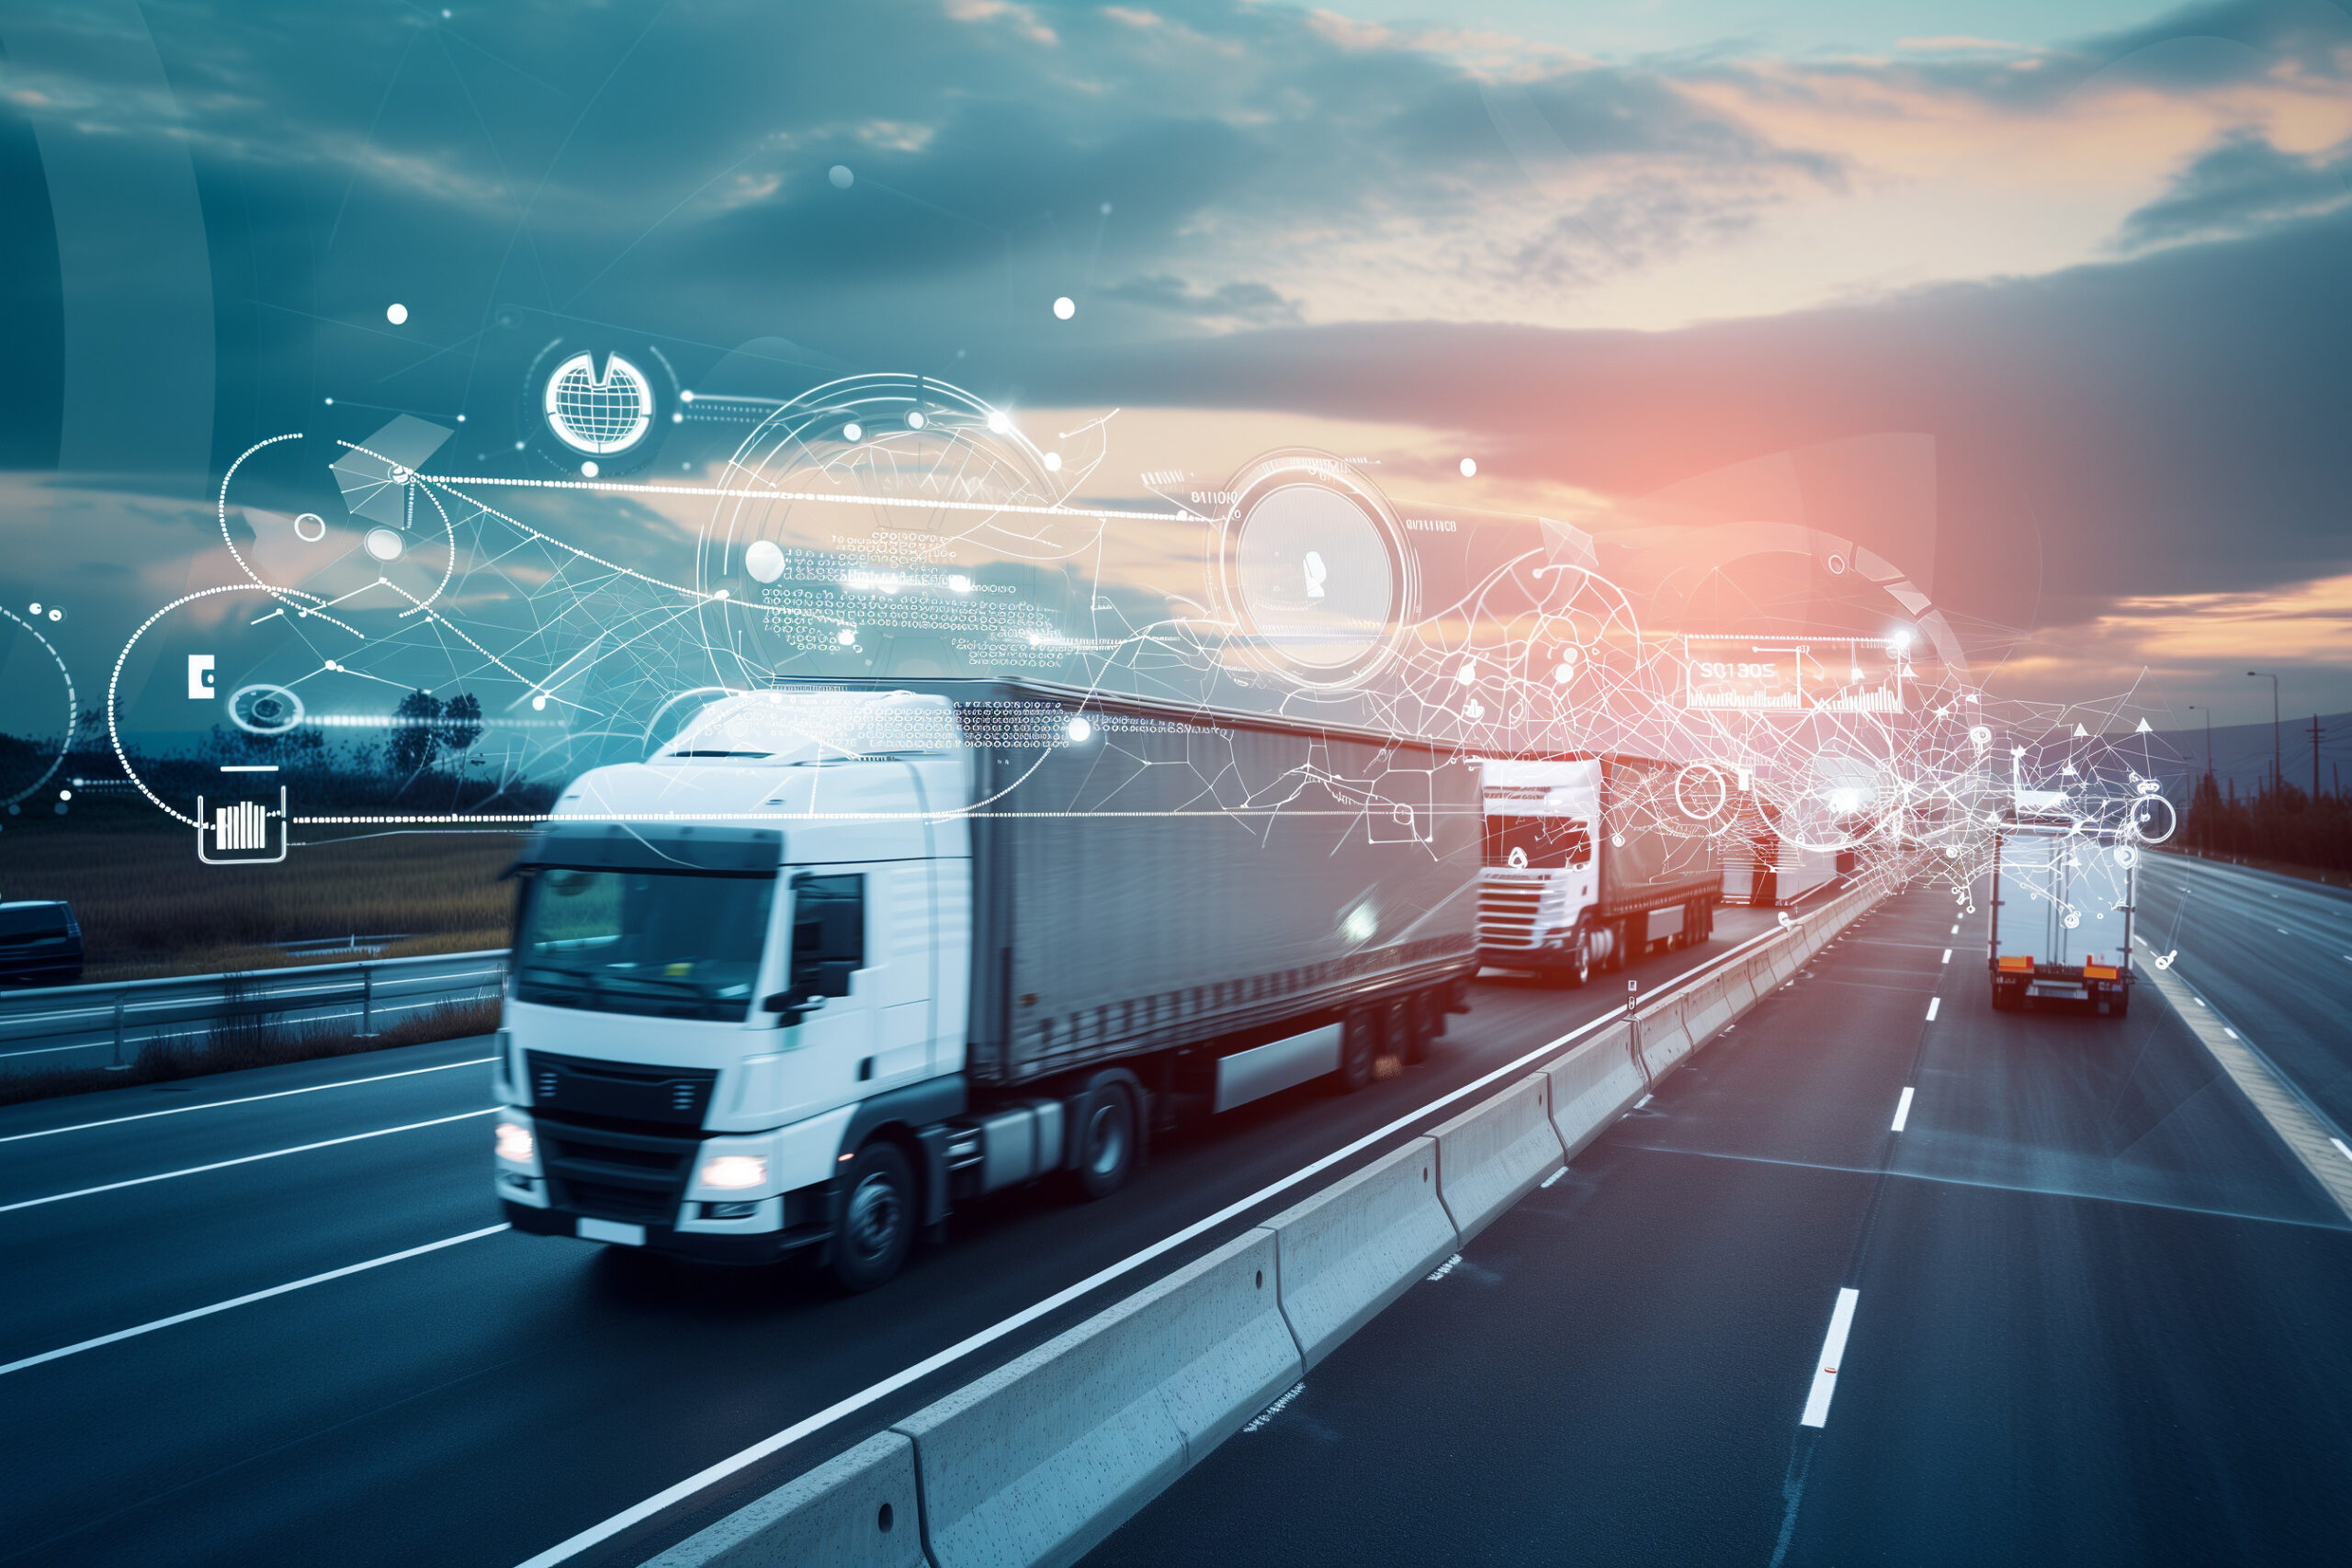 Image of trucks driving on a highway at sunset, with digital overlay graphics representing logistics and transportation technology, highlighting advancements in fleet management and connected vehicle systems.